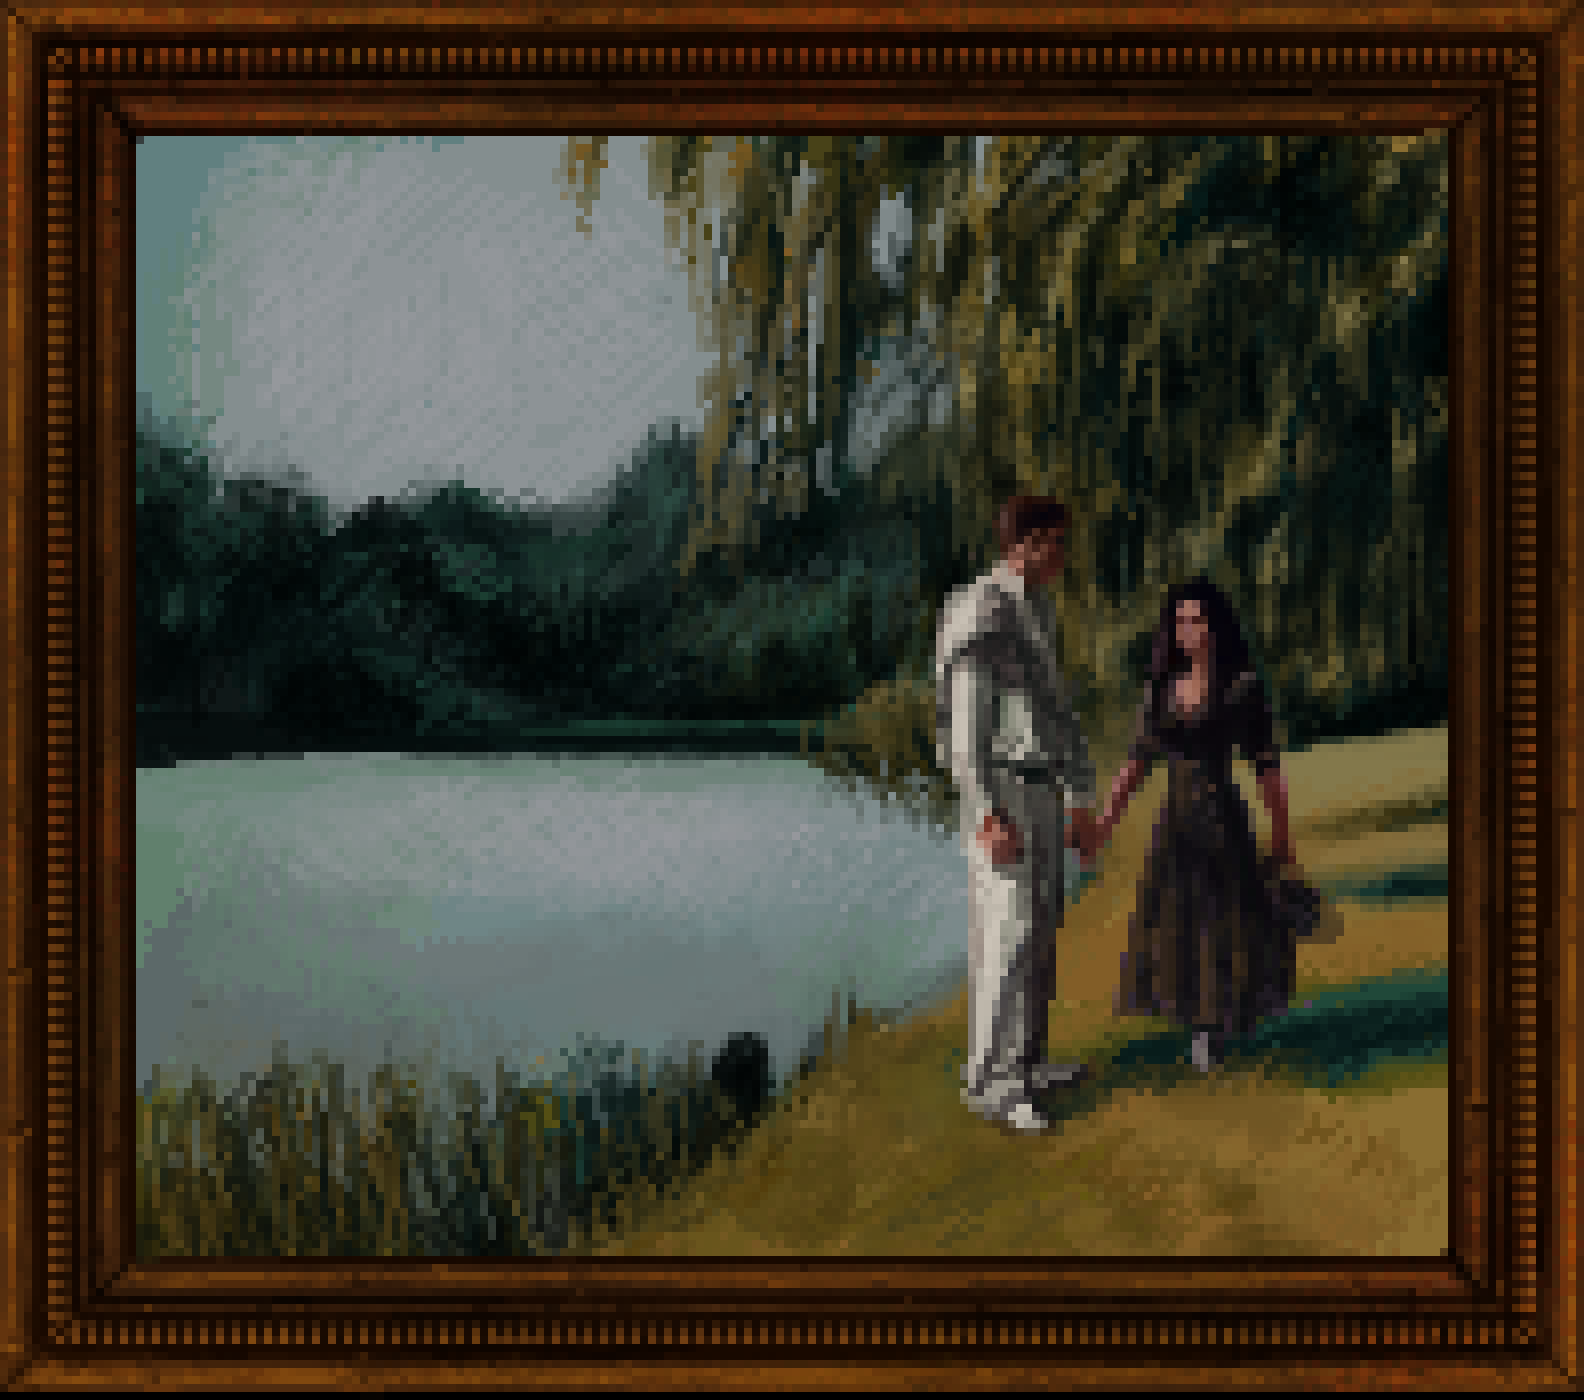 Pixel art painting in a frame showing a heterosexual couple on a sunny New England lake walking by the shore